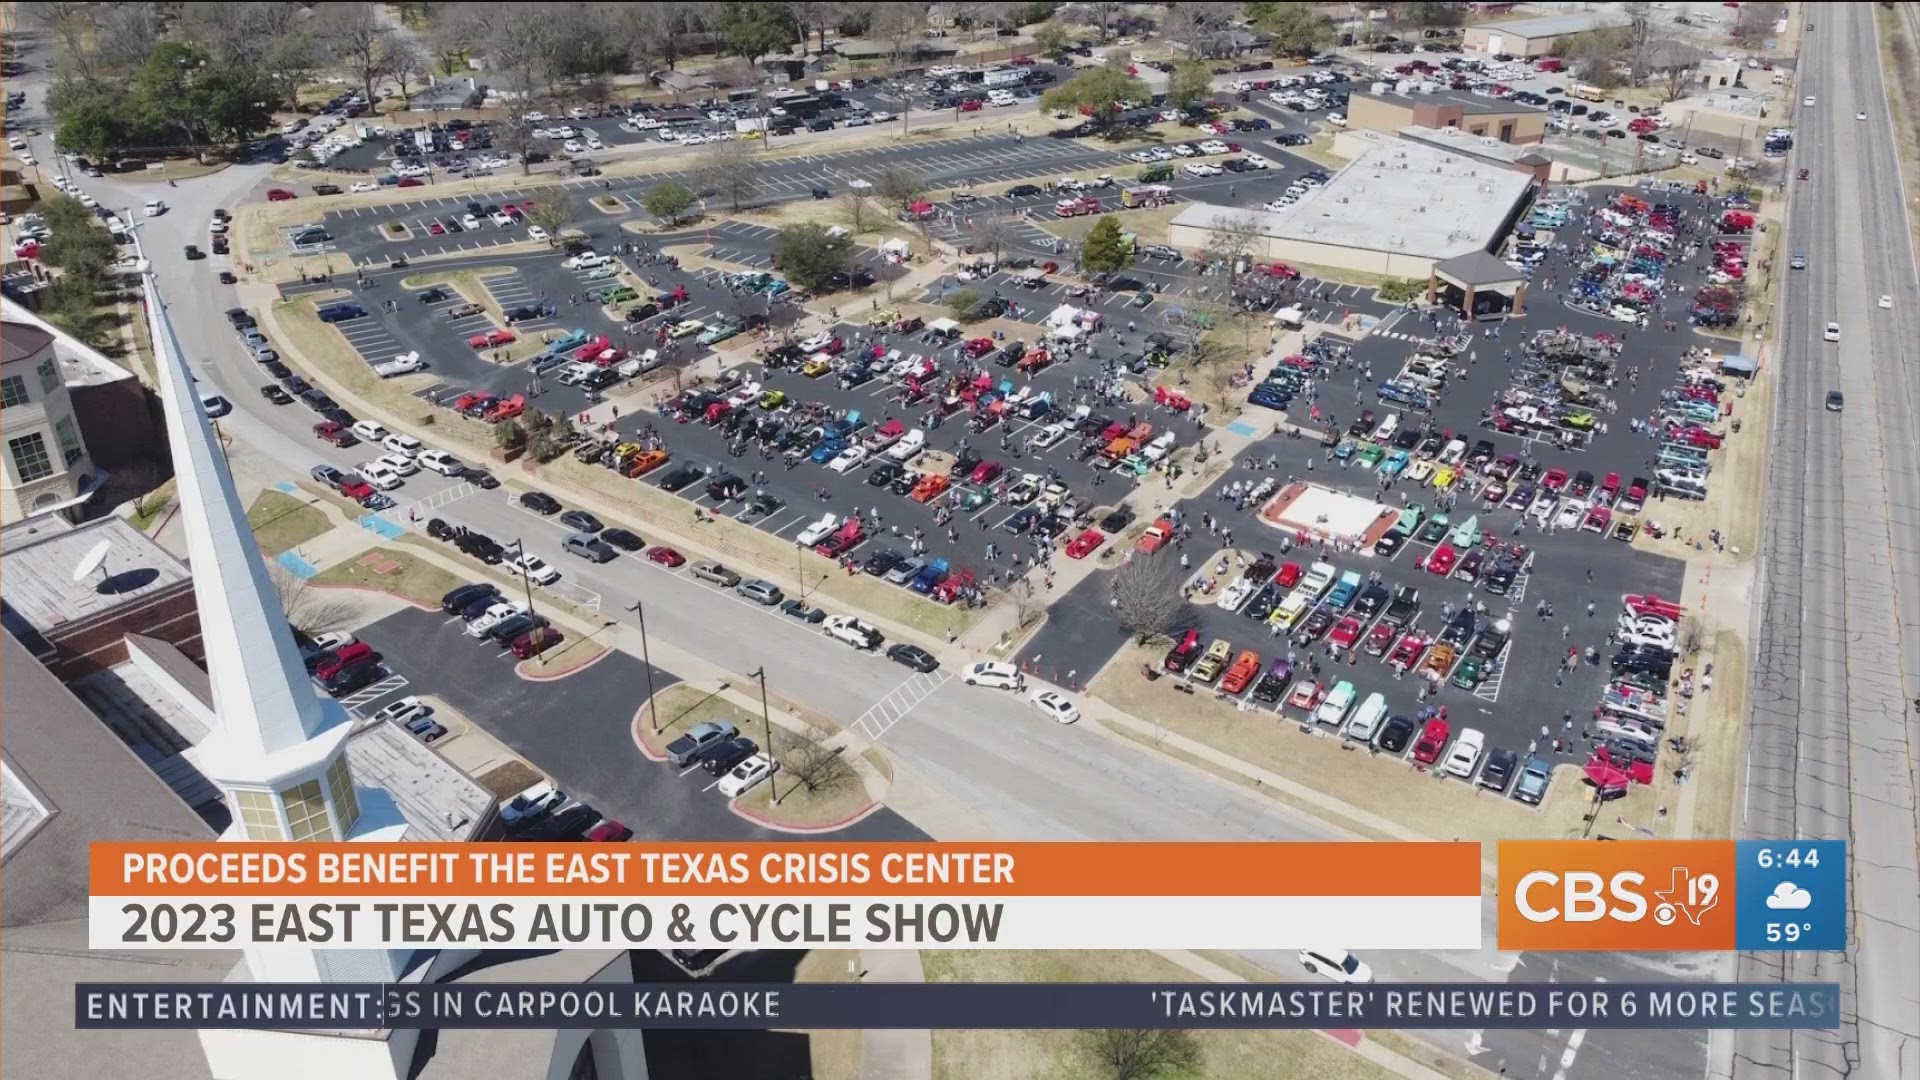 East Texas Auto and Cycle Show this weekend to benefit local domestic violence victims